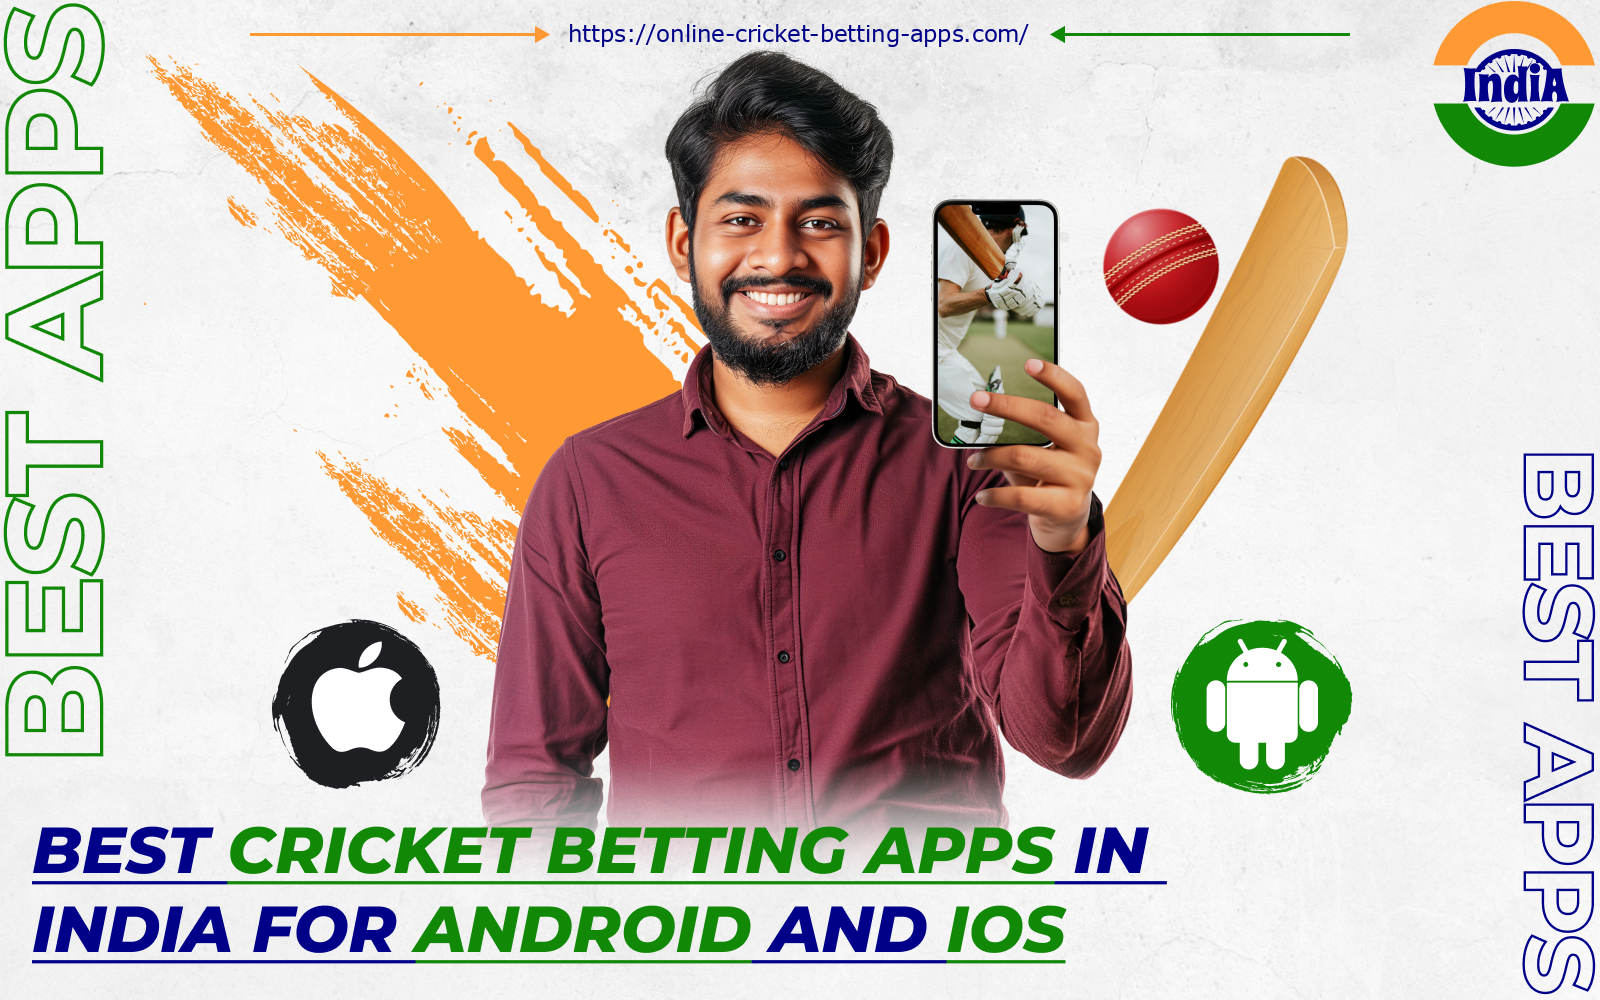 Cricket betting apps are gaining popularity in India today